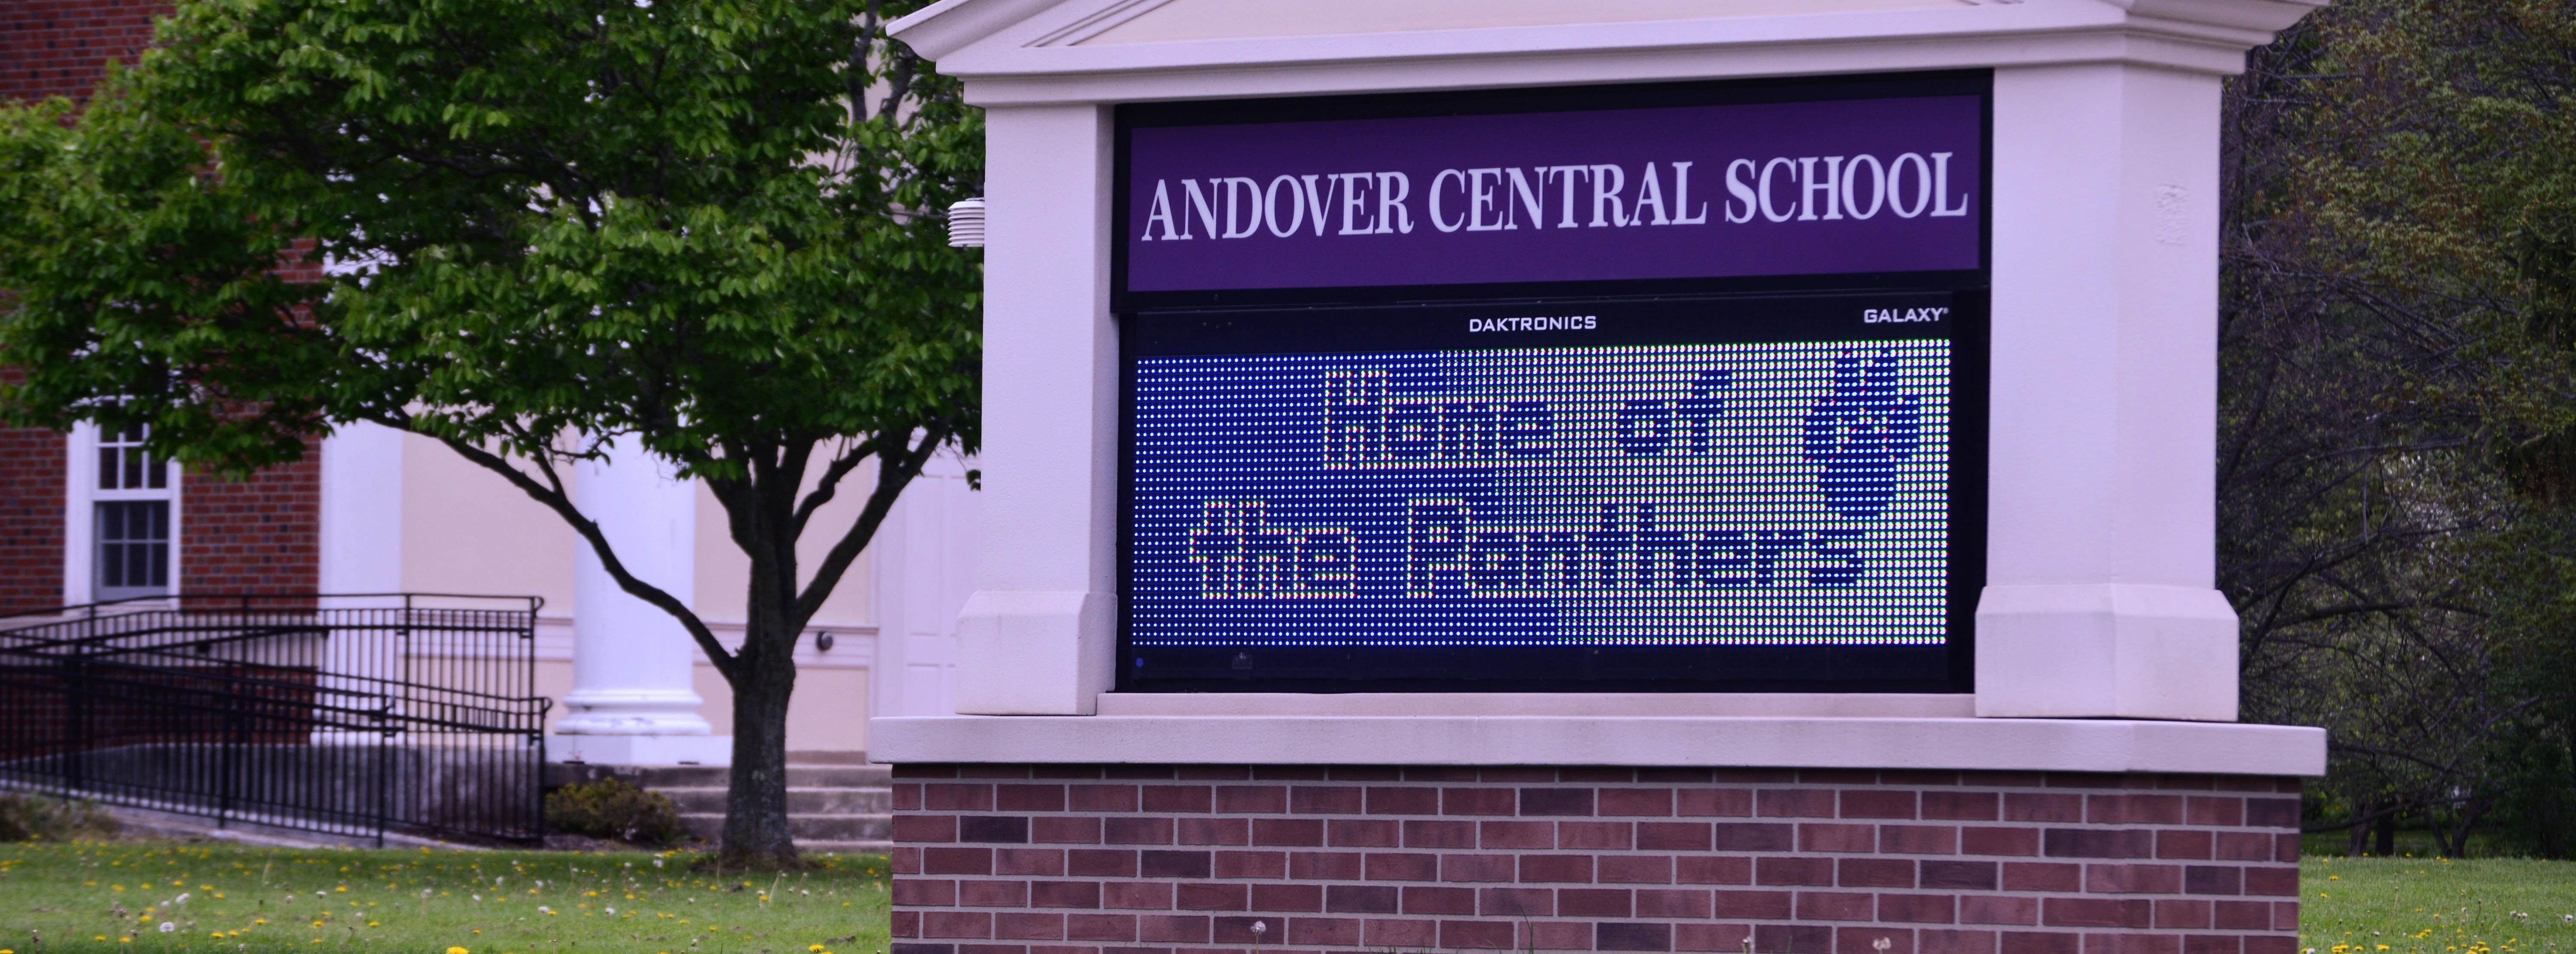 Andover Central School Sign Home of the Panthers